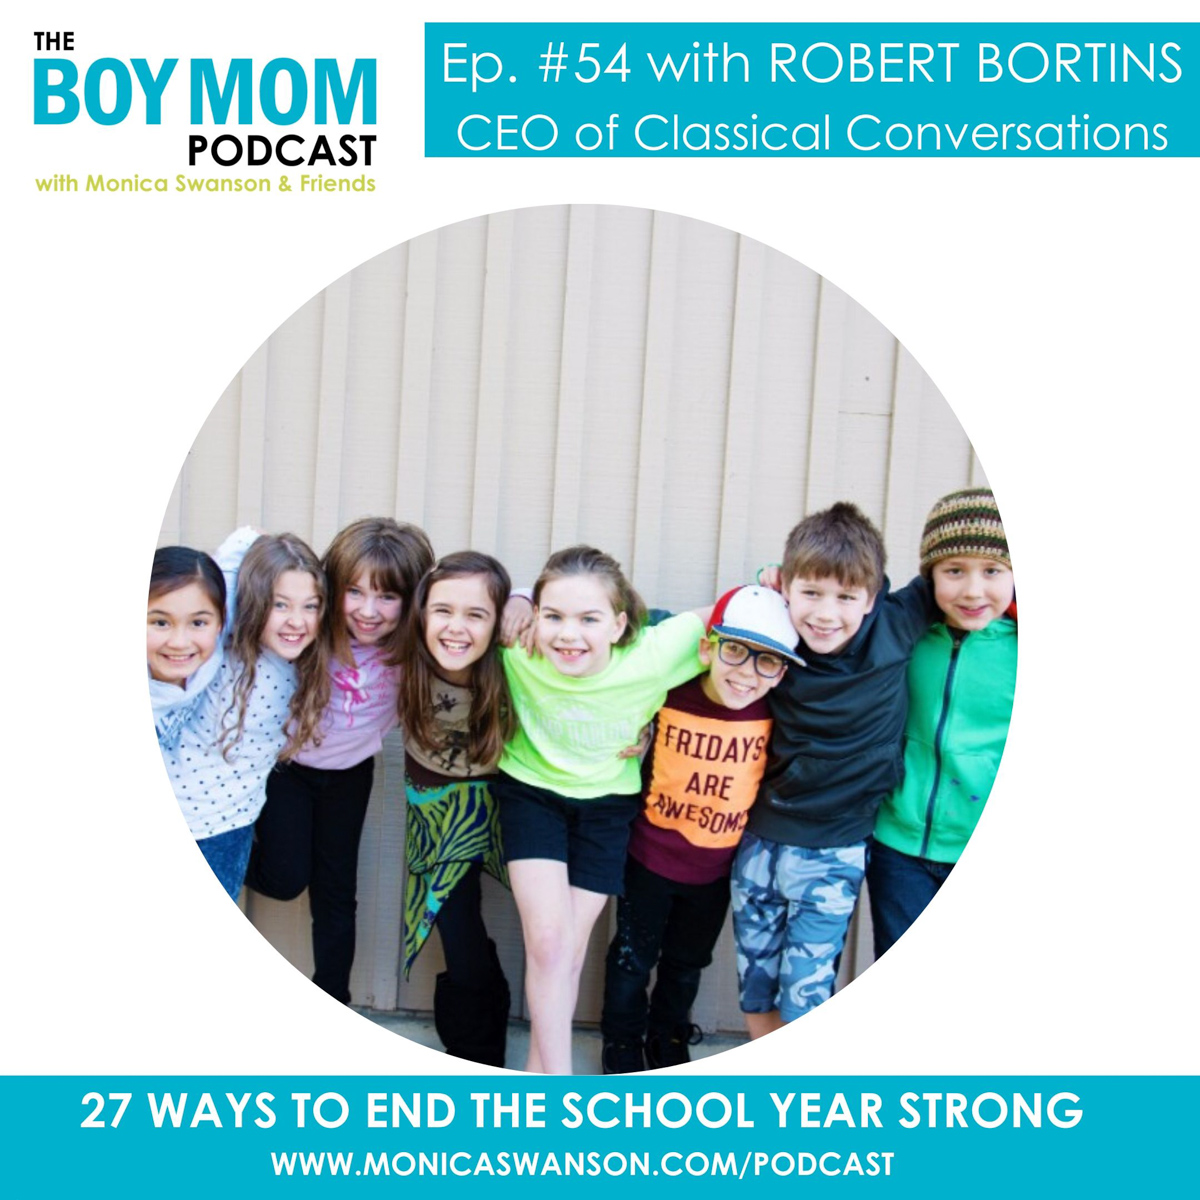 27 Ways to Finish the School Year Strong {Episode 54 with Robert Bortins}